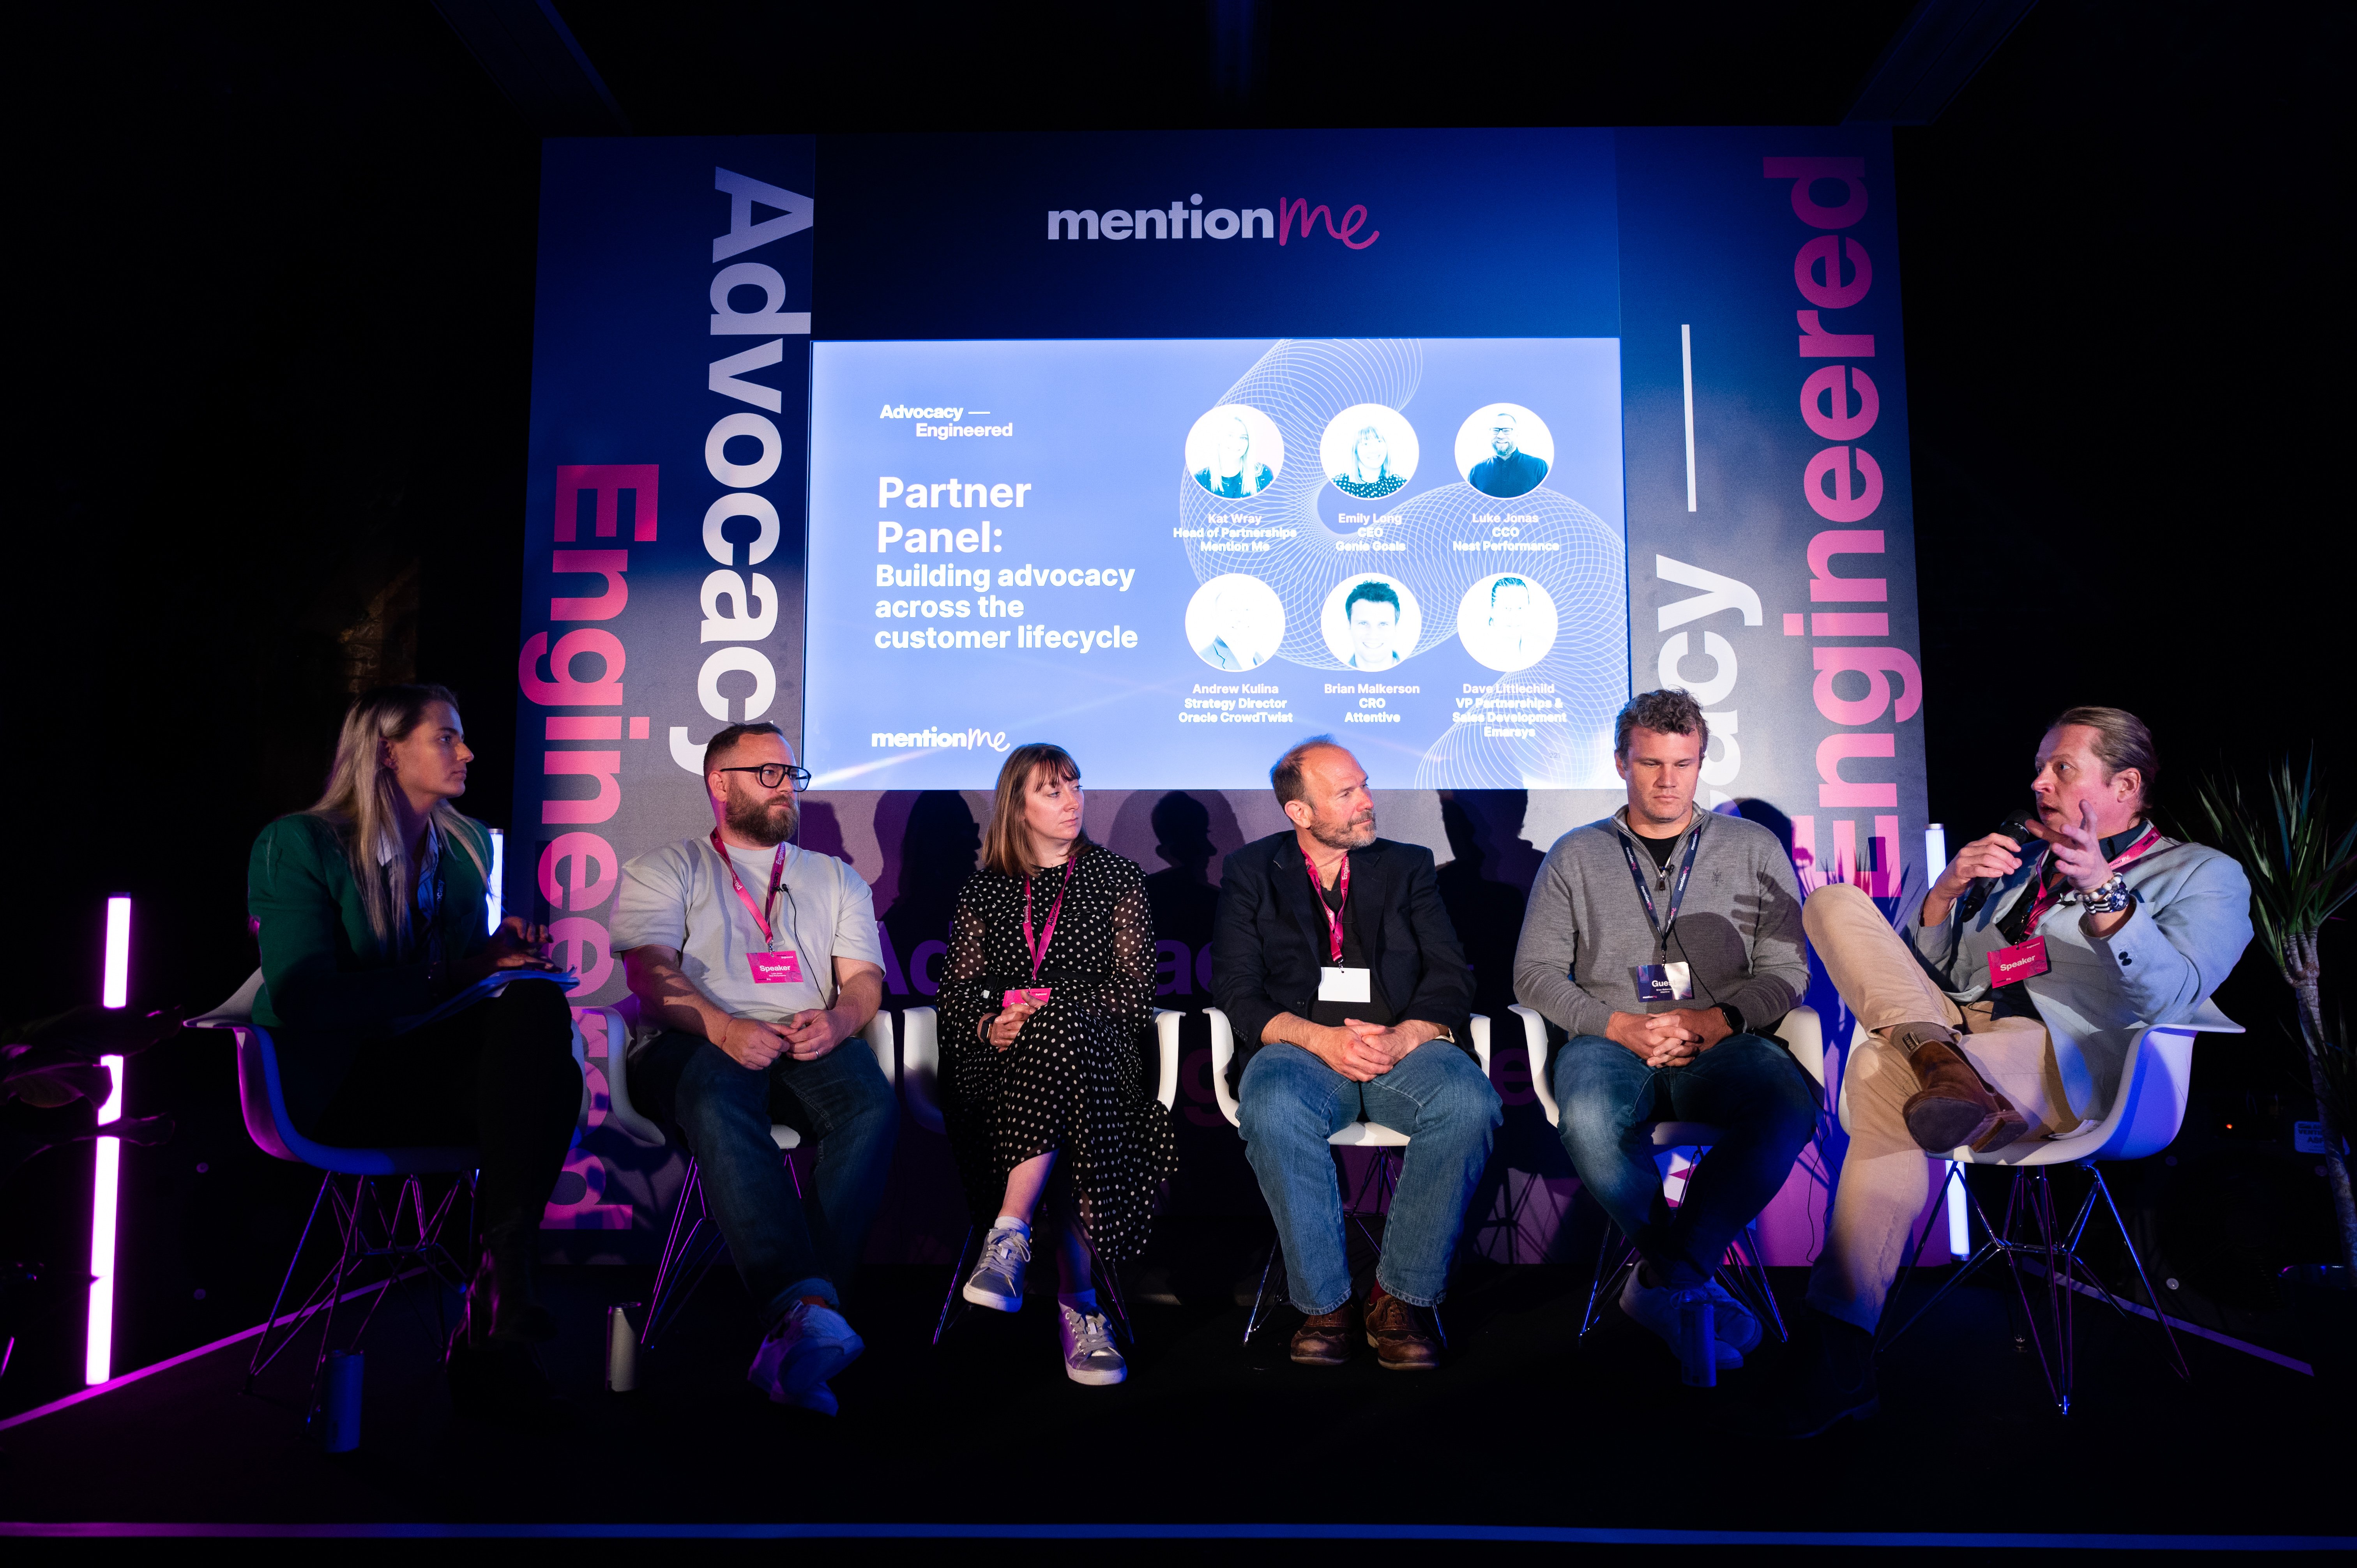 Kat Wray, Head of Partnerships at Mention Me, leading our Partner Panel